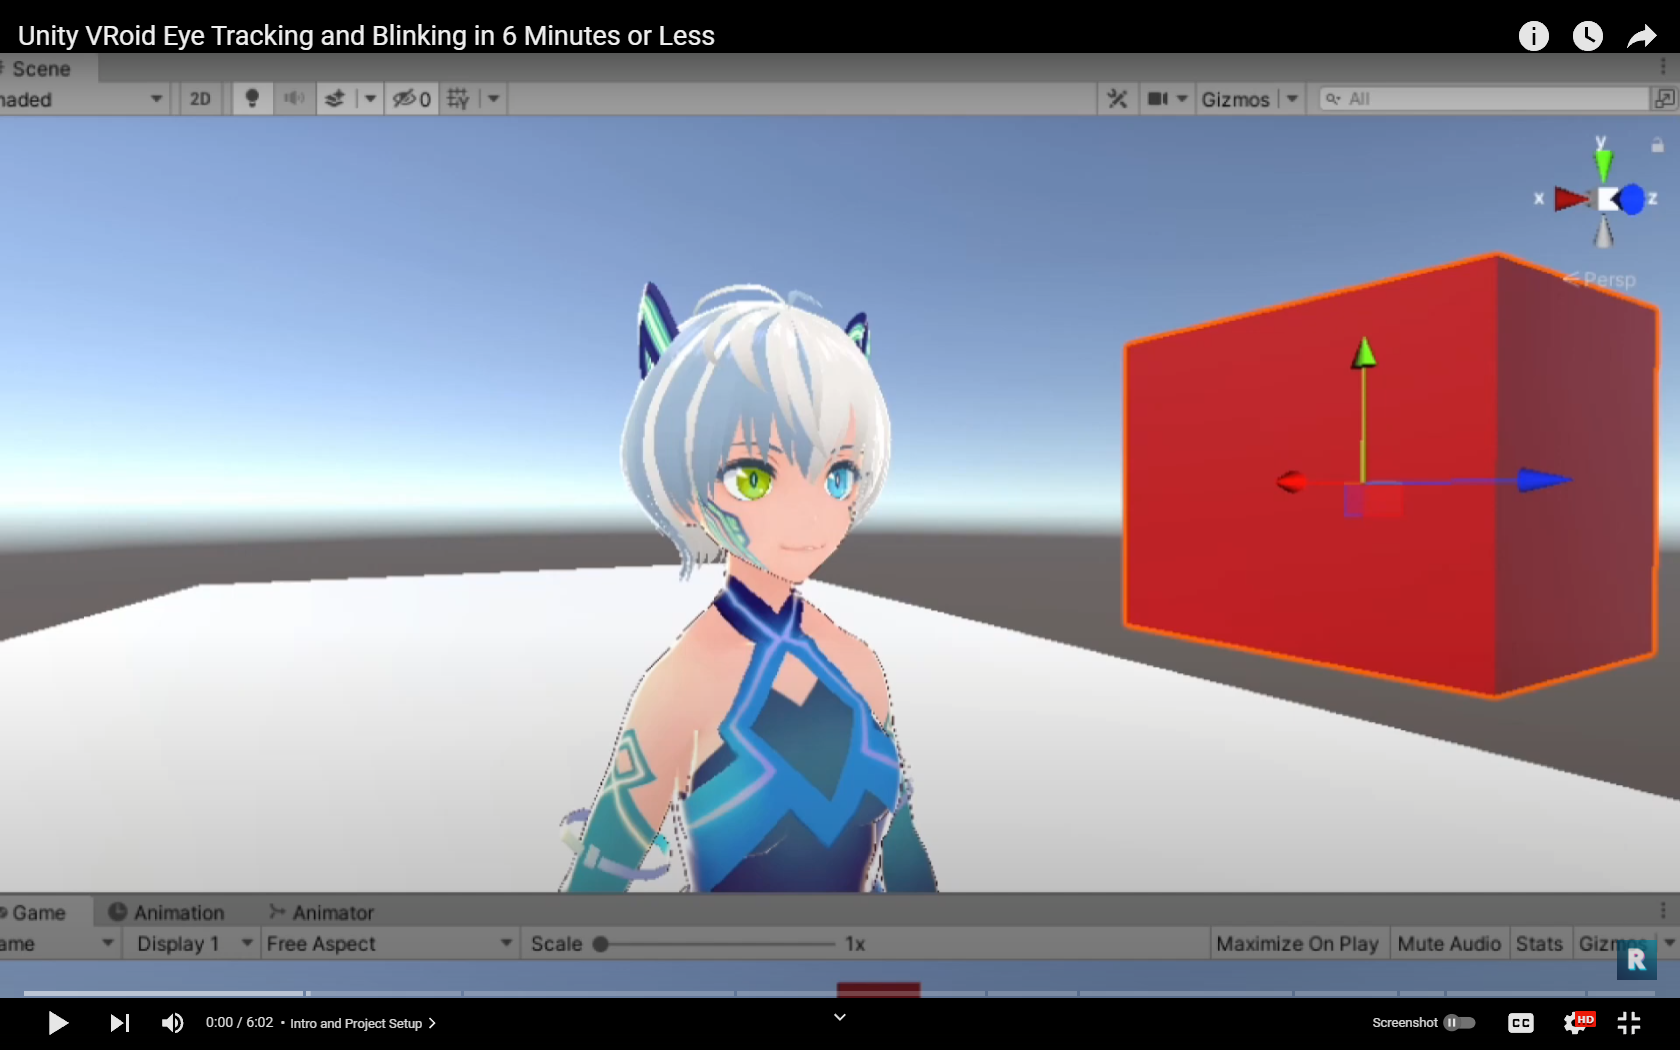 Unity VRoid Eye Tracking and Blinking in 6 Minutes or Less